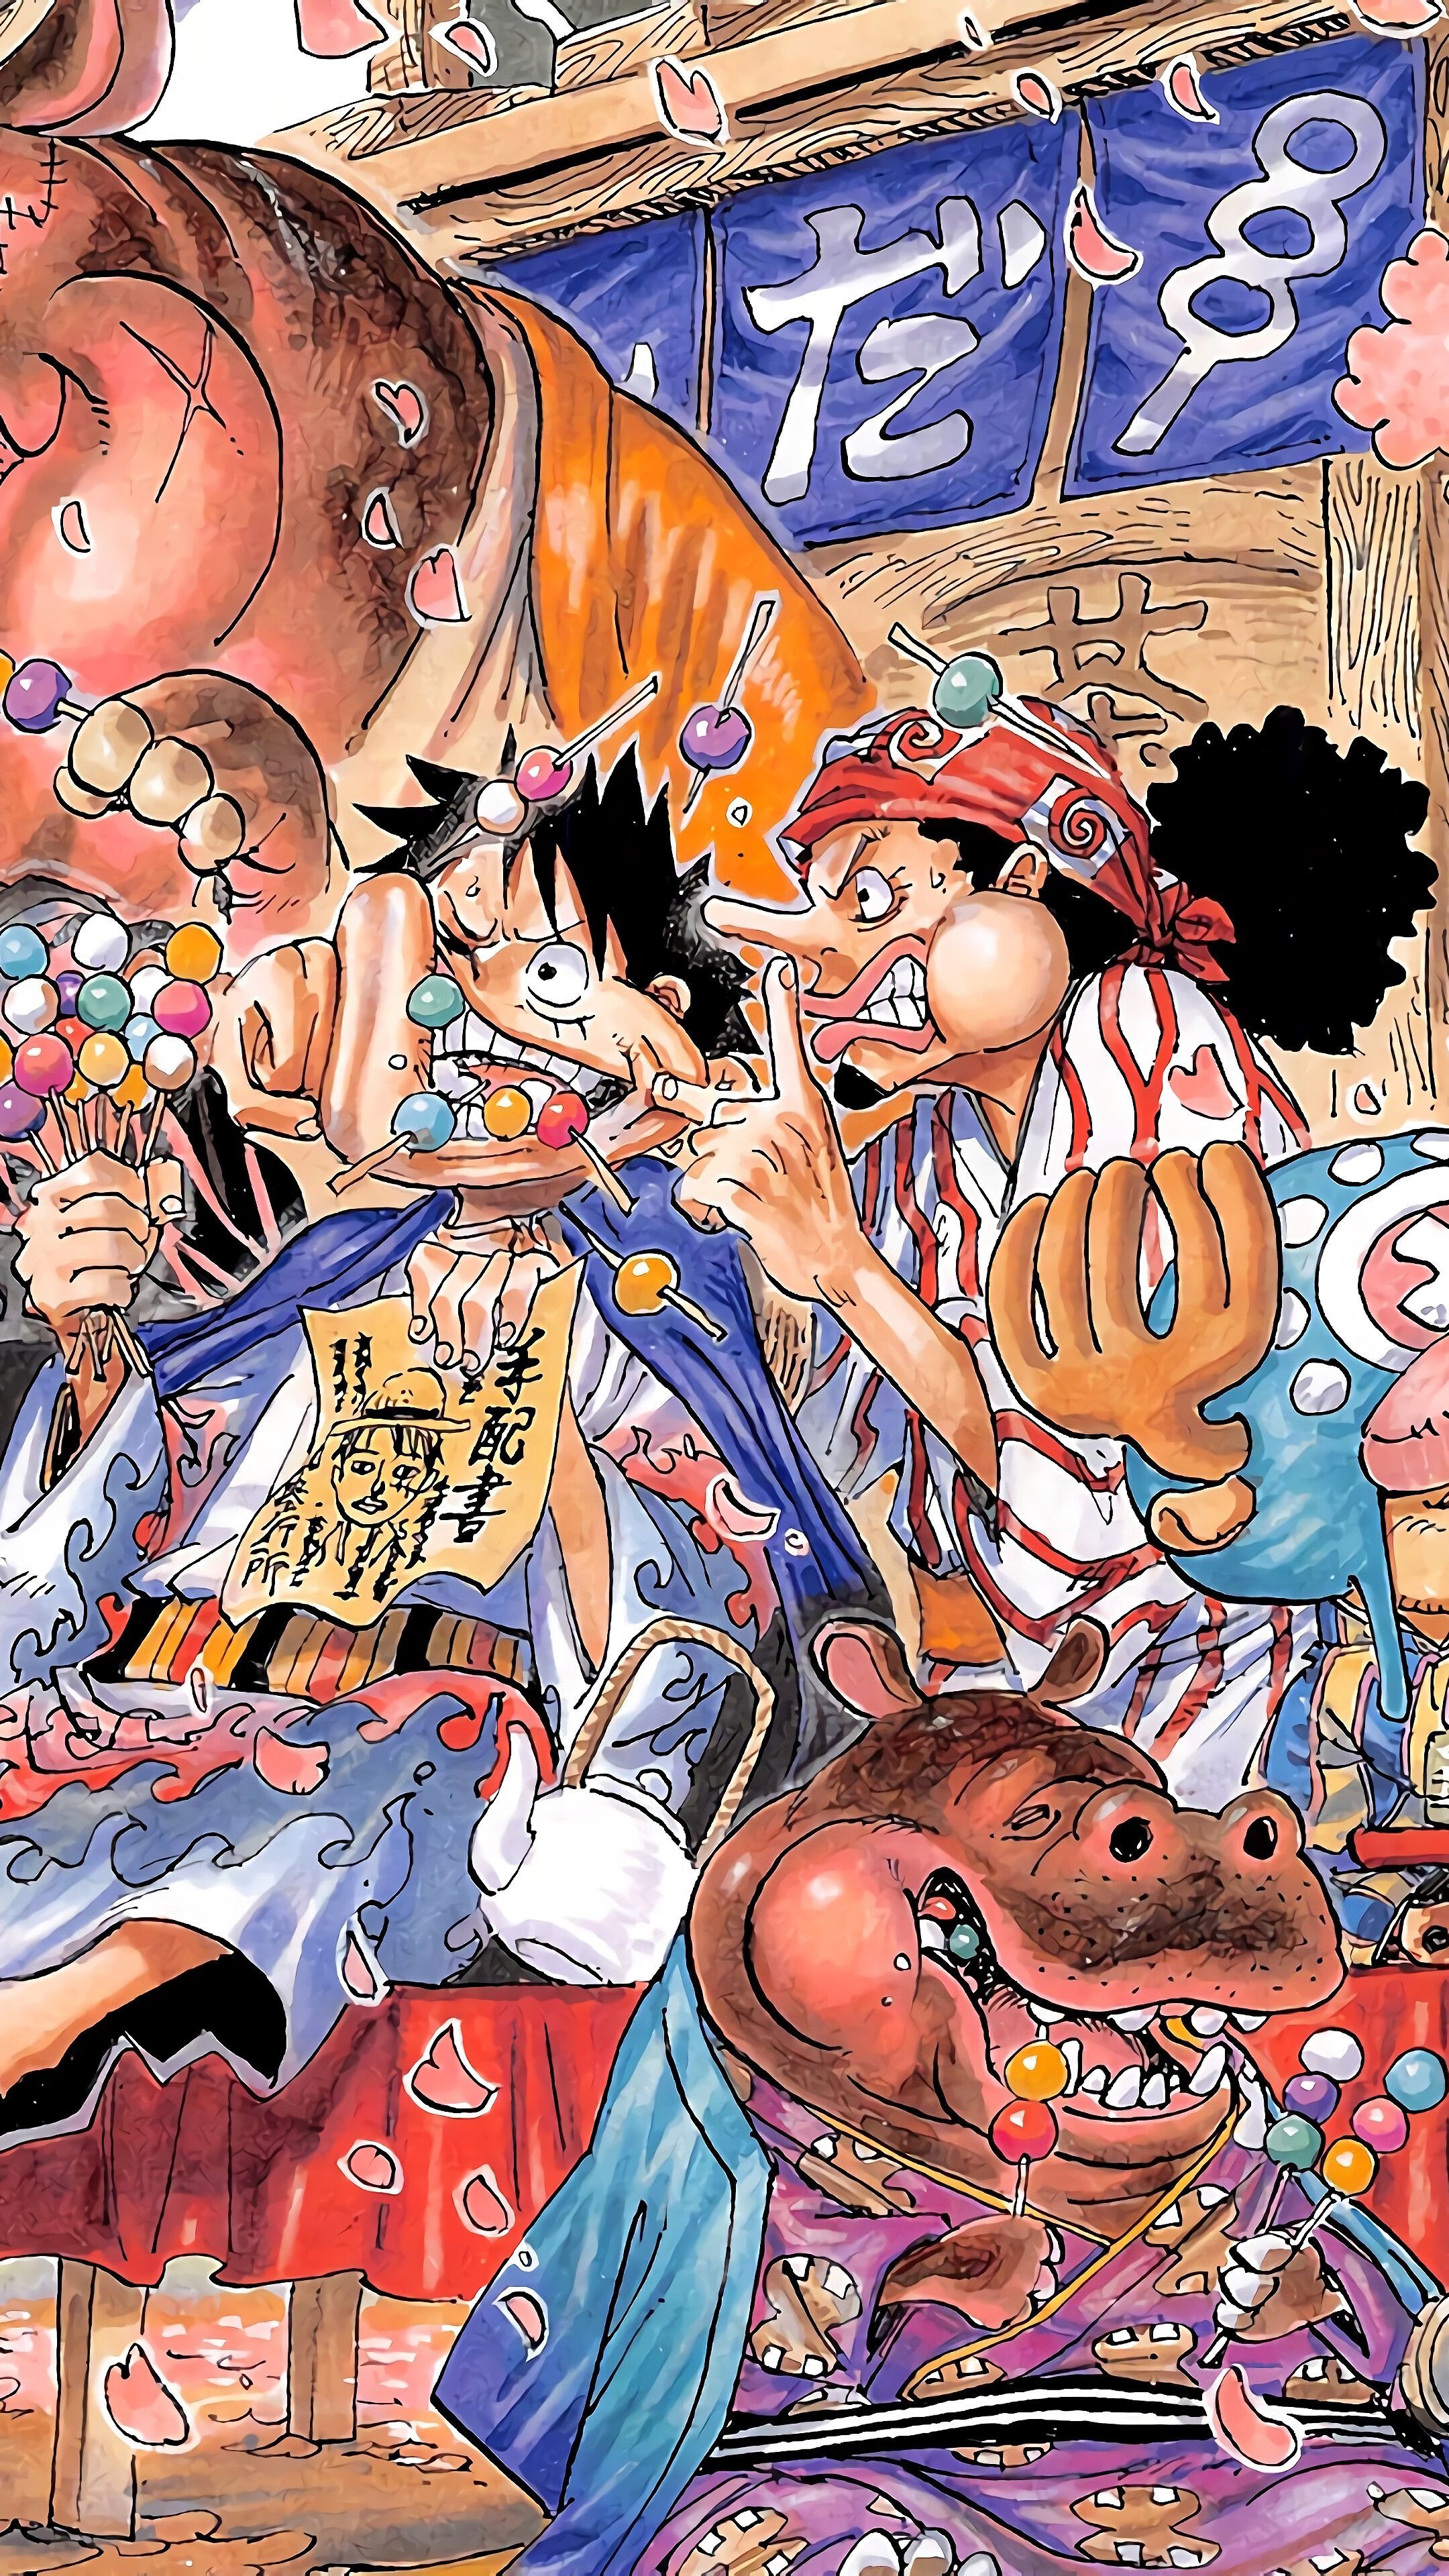 One Piece Straw Hat Pirates in a kimono in a candy shop in One Piece 989. - One Piece